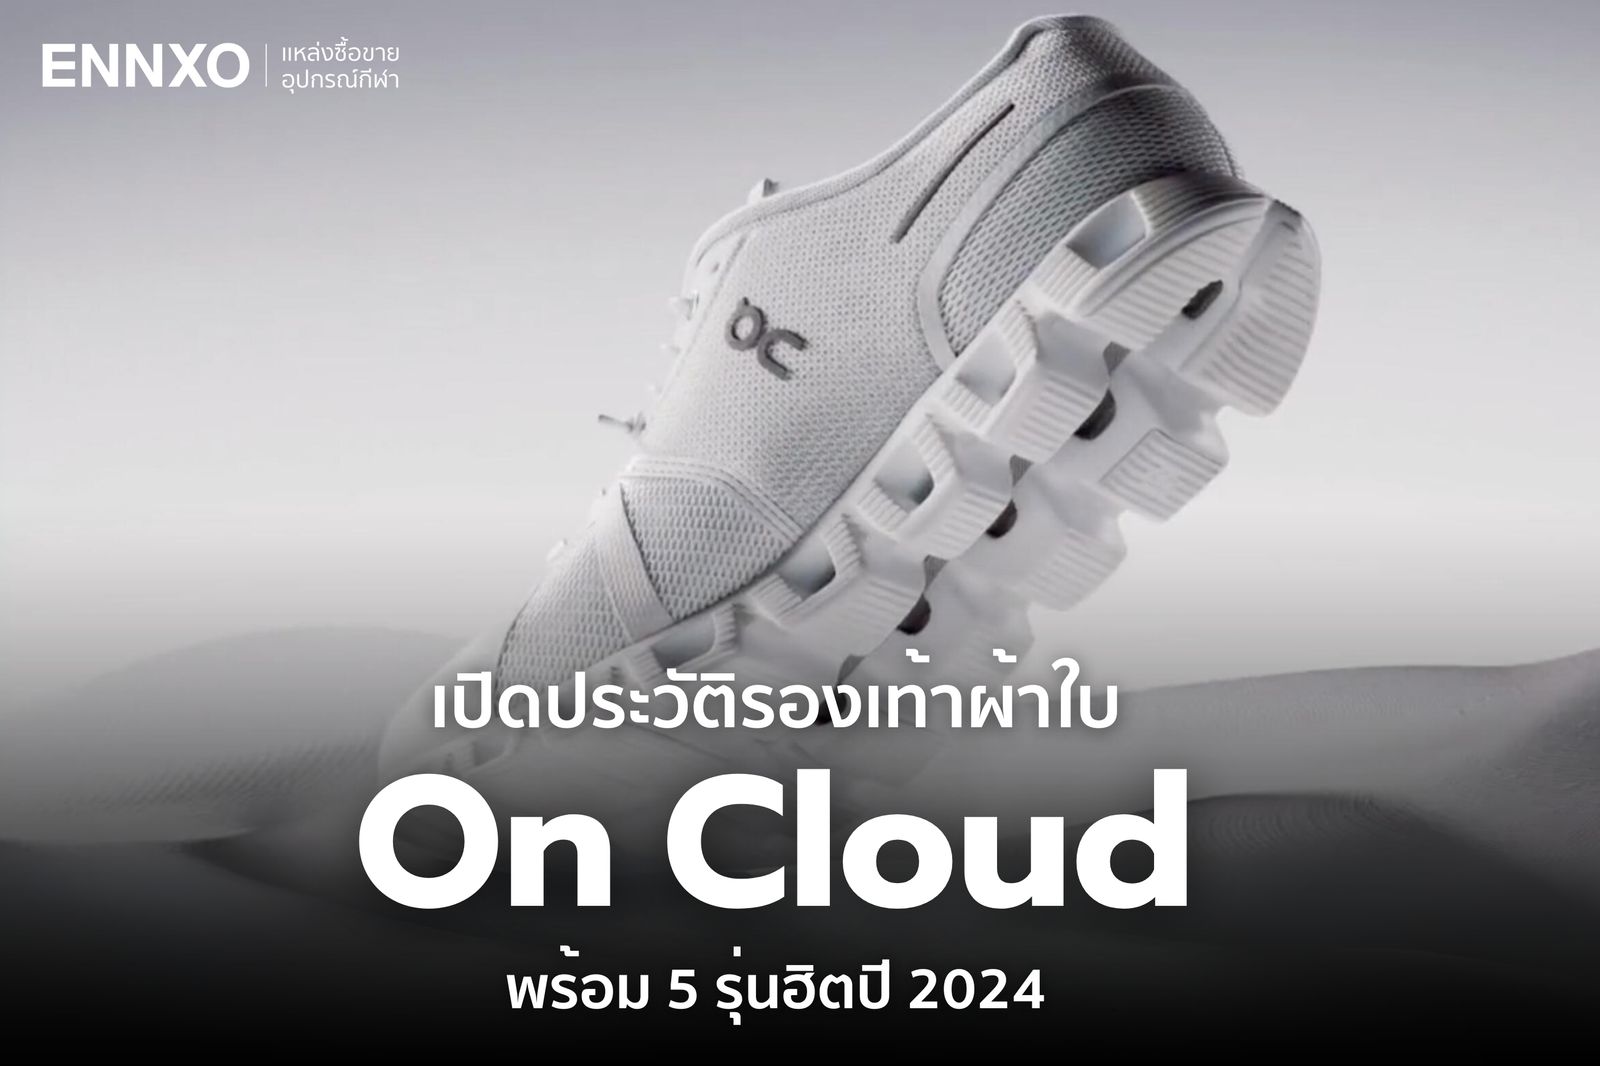 On Cloud shoes